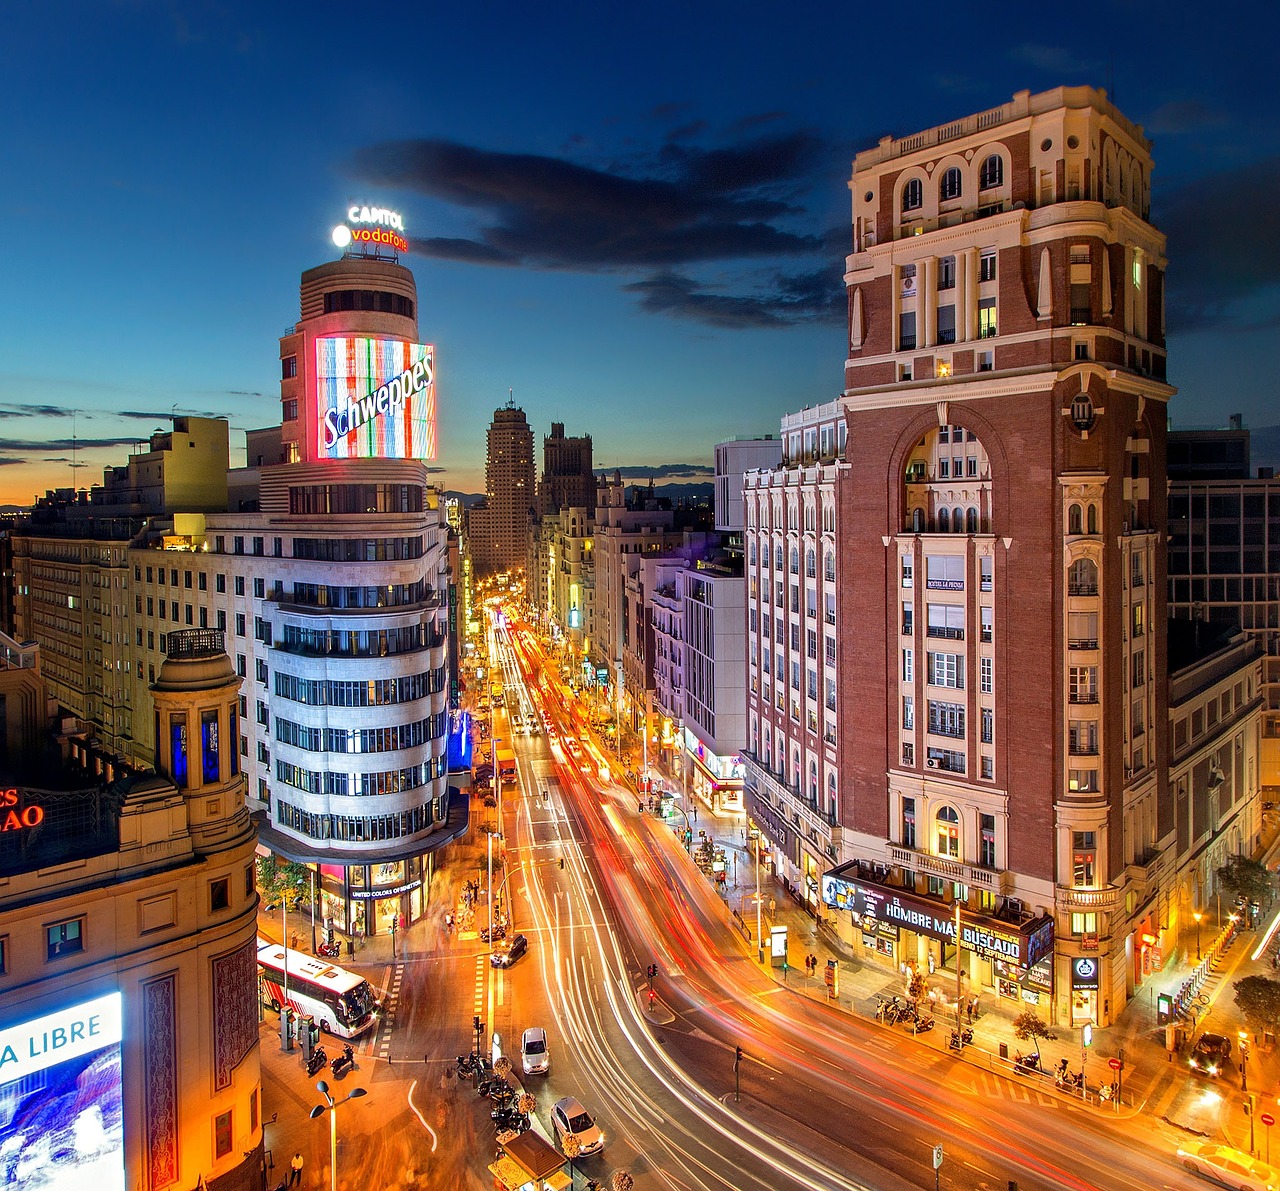 Artistic Delights in Madrid: Museums, Galleries, and Flamenco